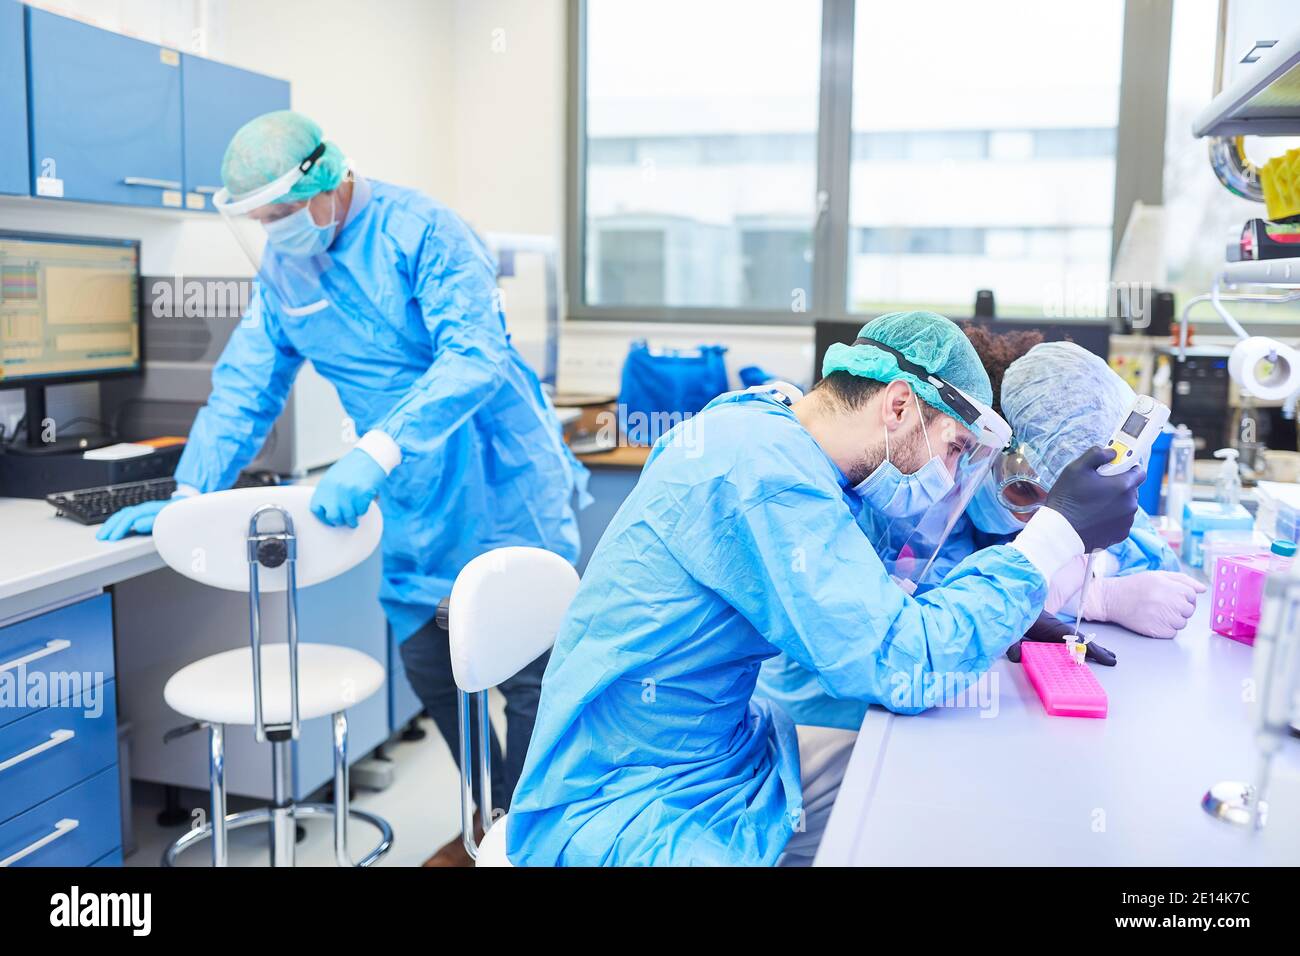 Group scientists research in the laboratory on Covid-19 vaccine for coronavirus pandemic Stock Photo